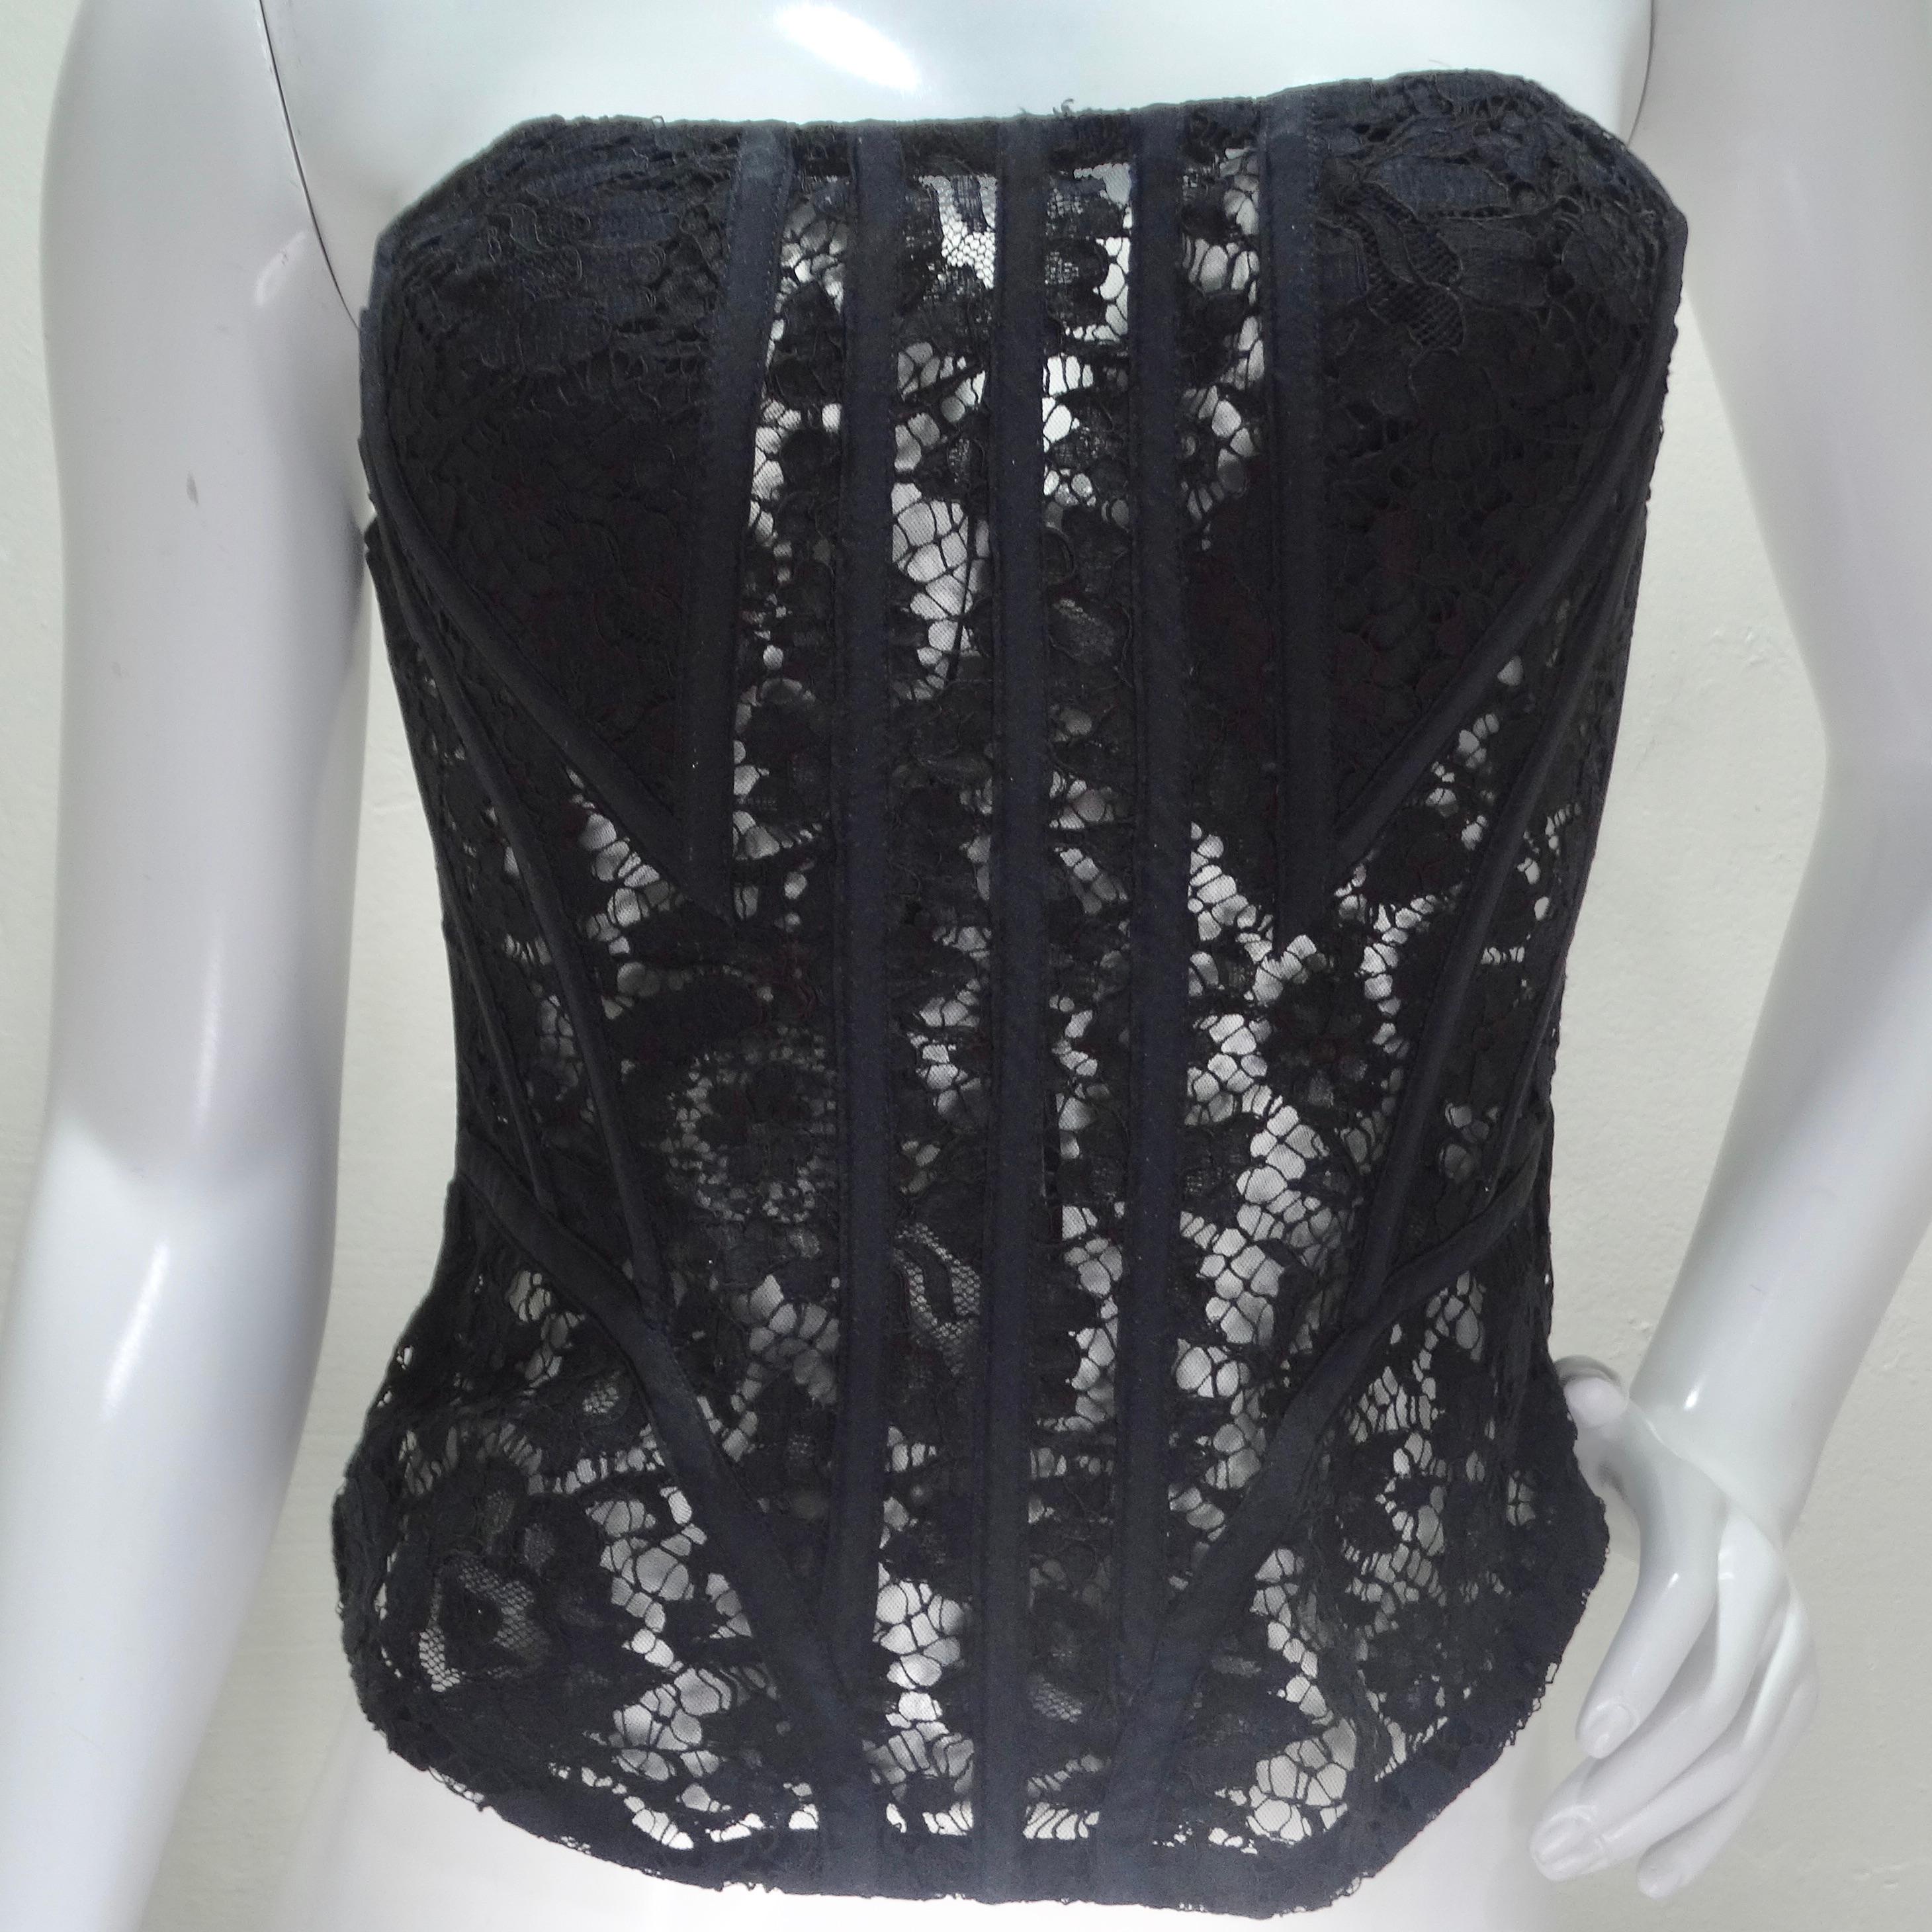 Dolce & Gabbana Lace Panelled Corset Top In Excellent Condition For Sale In Scottsdale, AZ